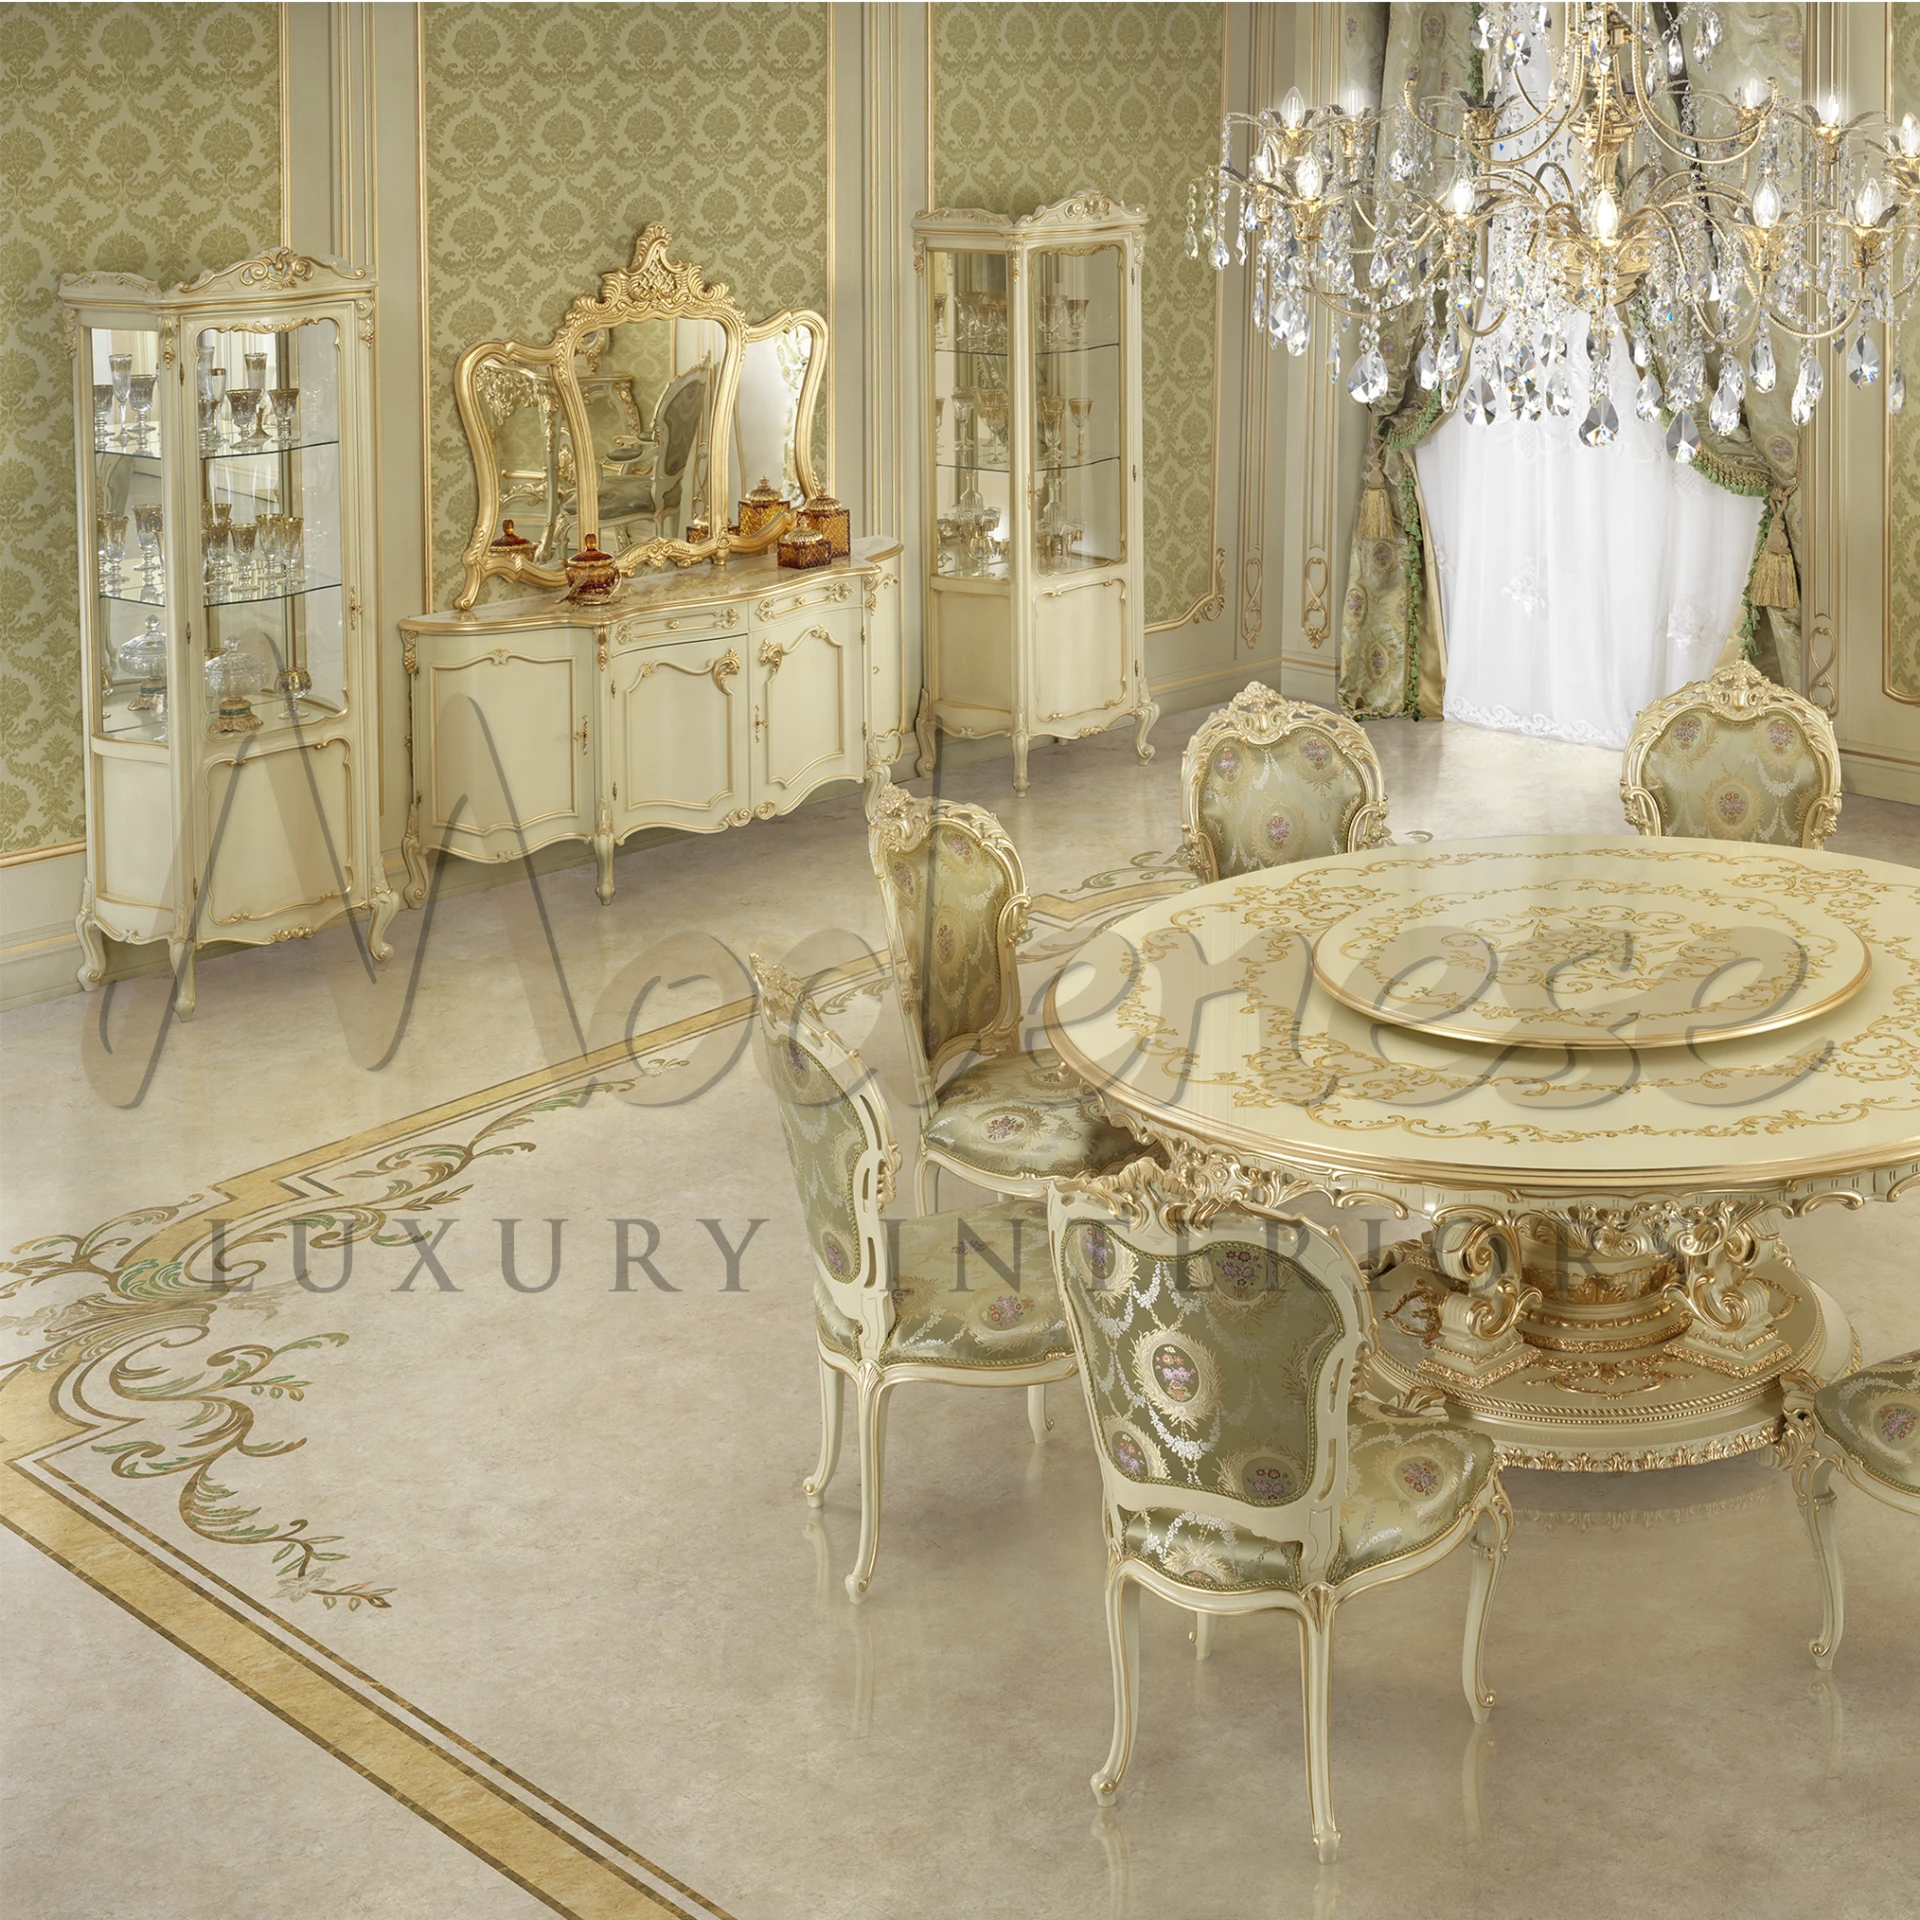 A grand dining room with a large fancy gold and cream table, luxurious chairs, and a crystal chandelier